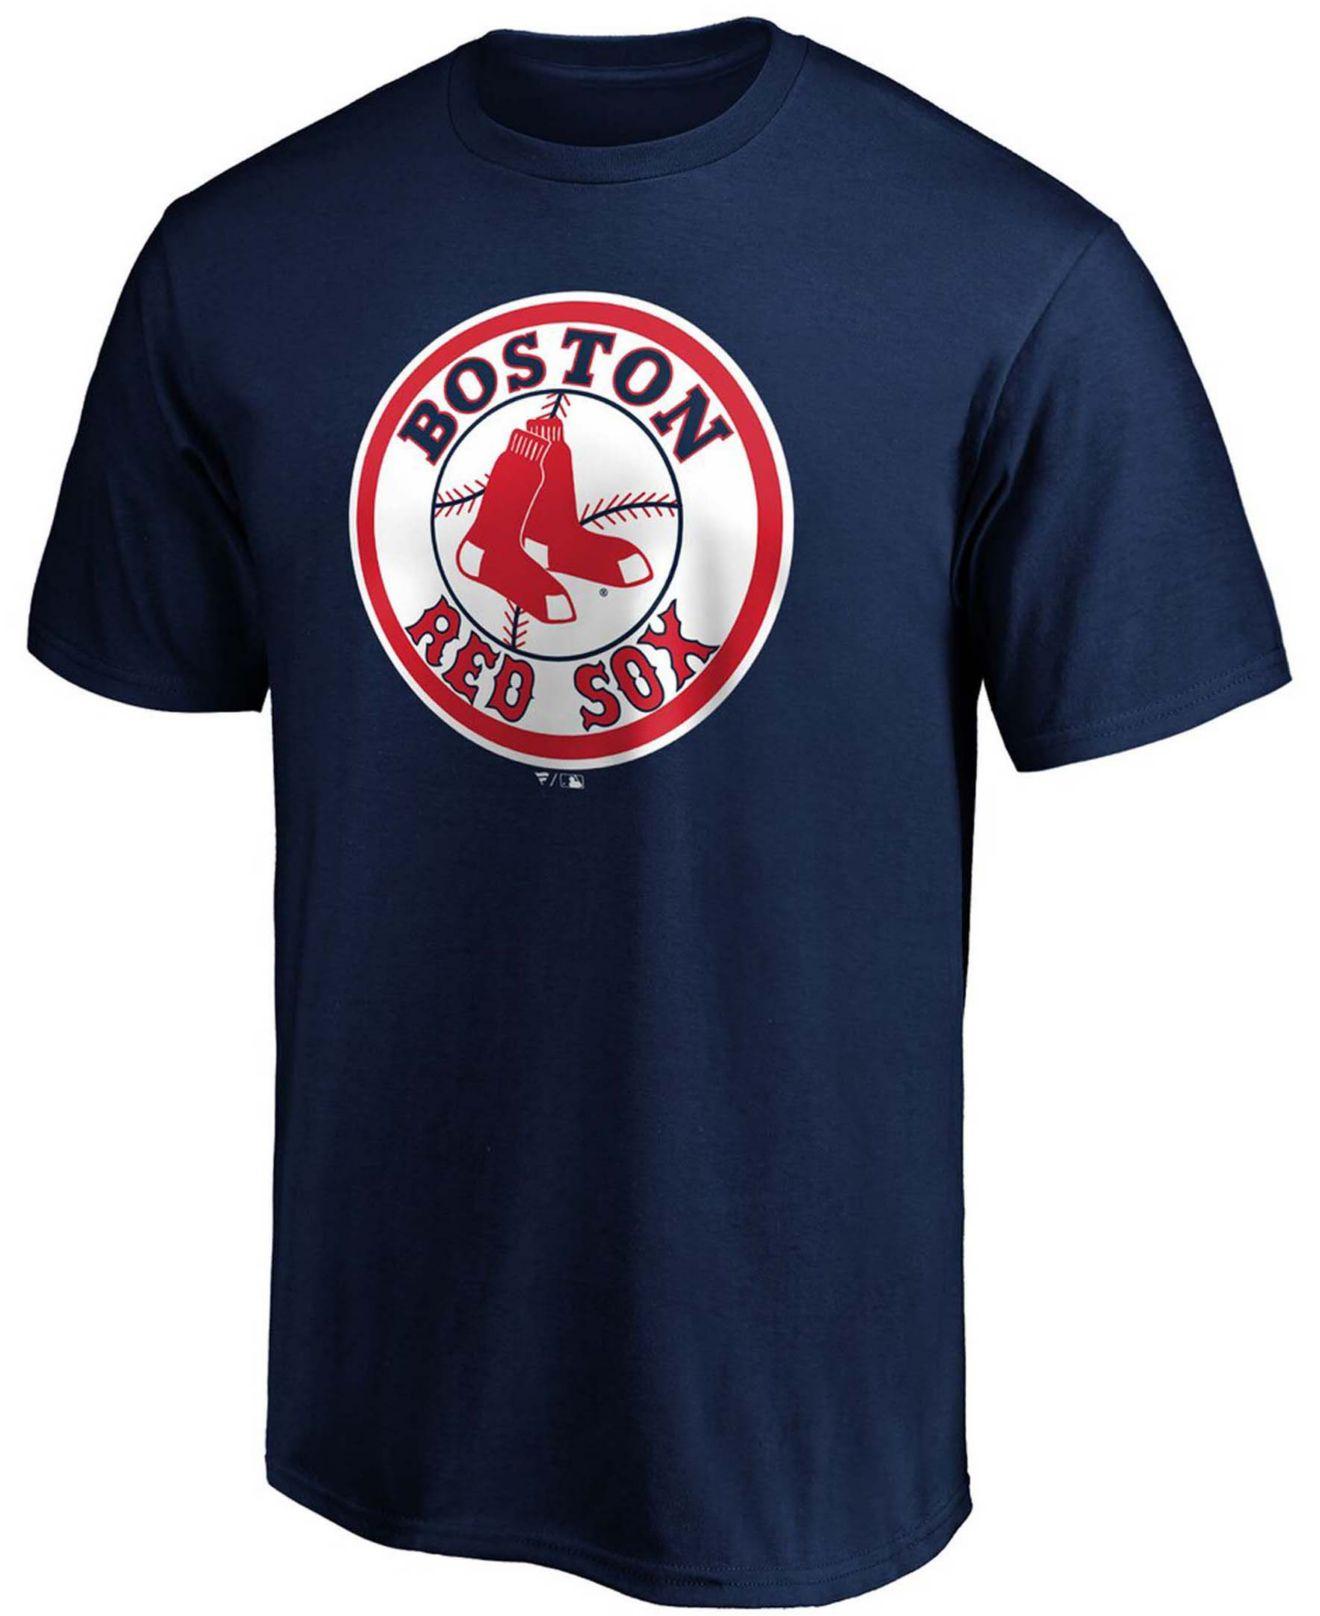 Boston Red Sox Fanatics Branded Cooperstown Collection Forbes Team T-Shirt  - Navy